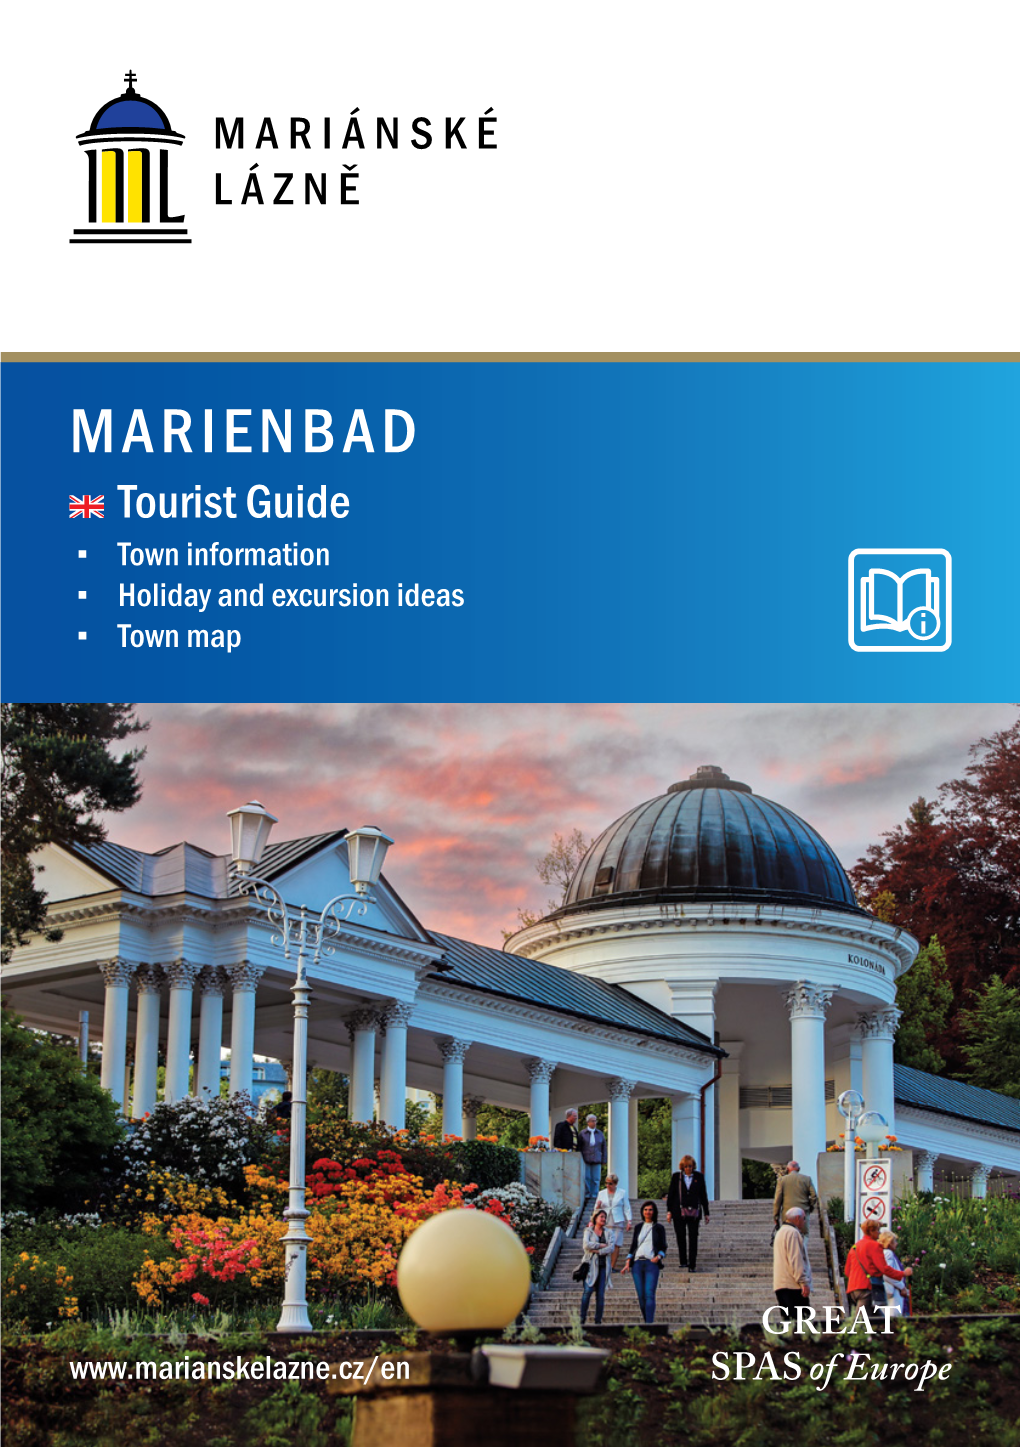 MARIENBAD Tourist Guide ▪▪ Town Information ▪▪ Holiday and Excursion Ideas ▪▪ Town Map